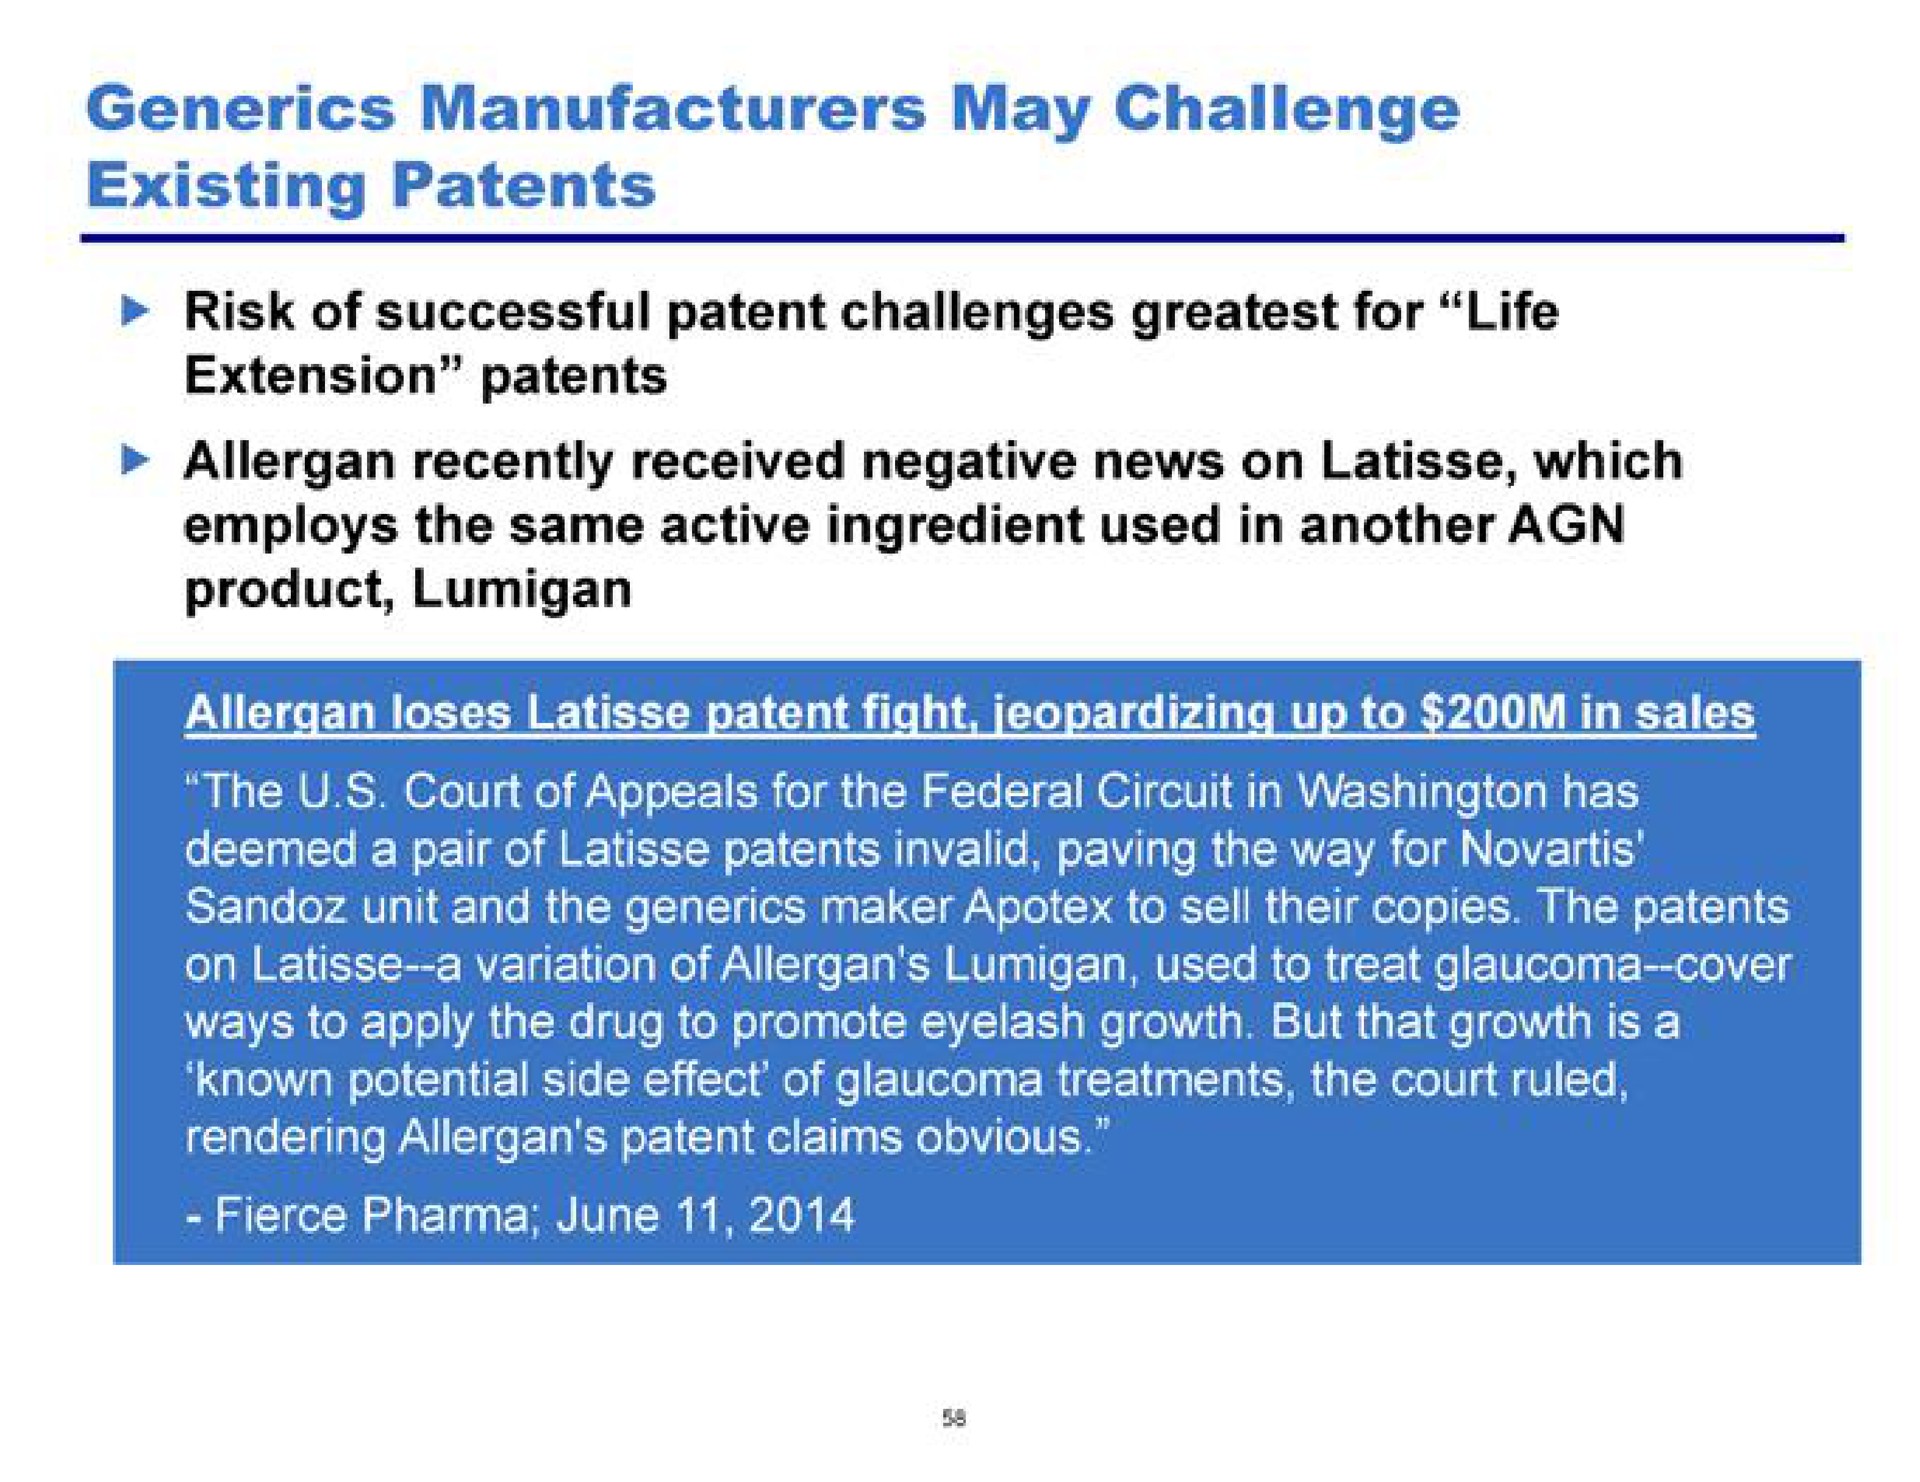 generics manufacturers may challenge existing patents | Pershing Square